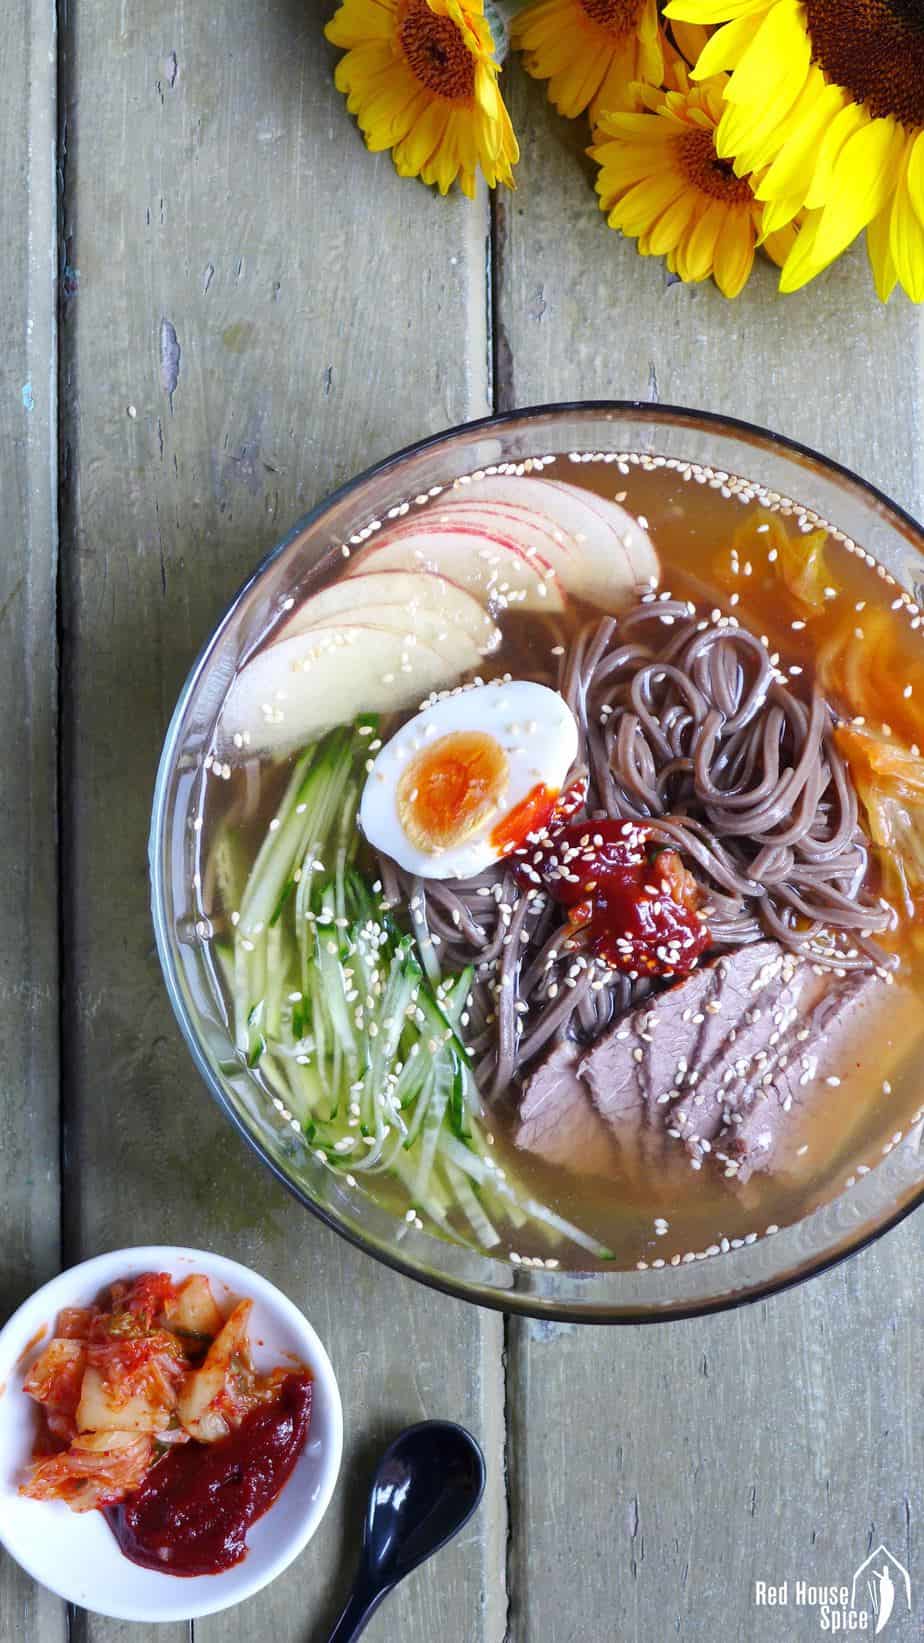 Slippery noodles in ice cold soup, served with various healthy toppings, cold soba noodles in beef broth is a perfect dish to cool you down in hot weather.